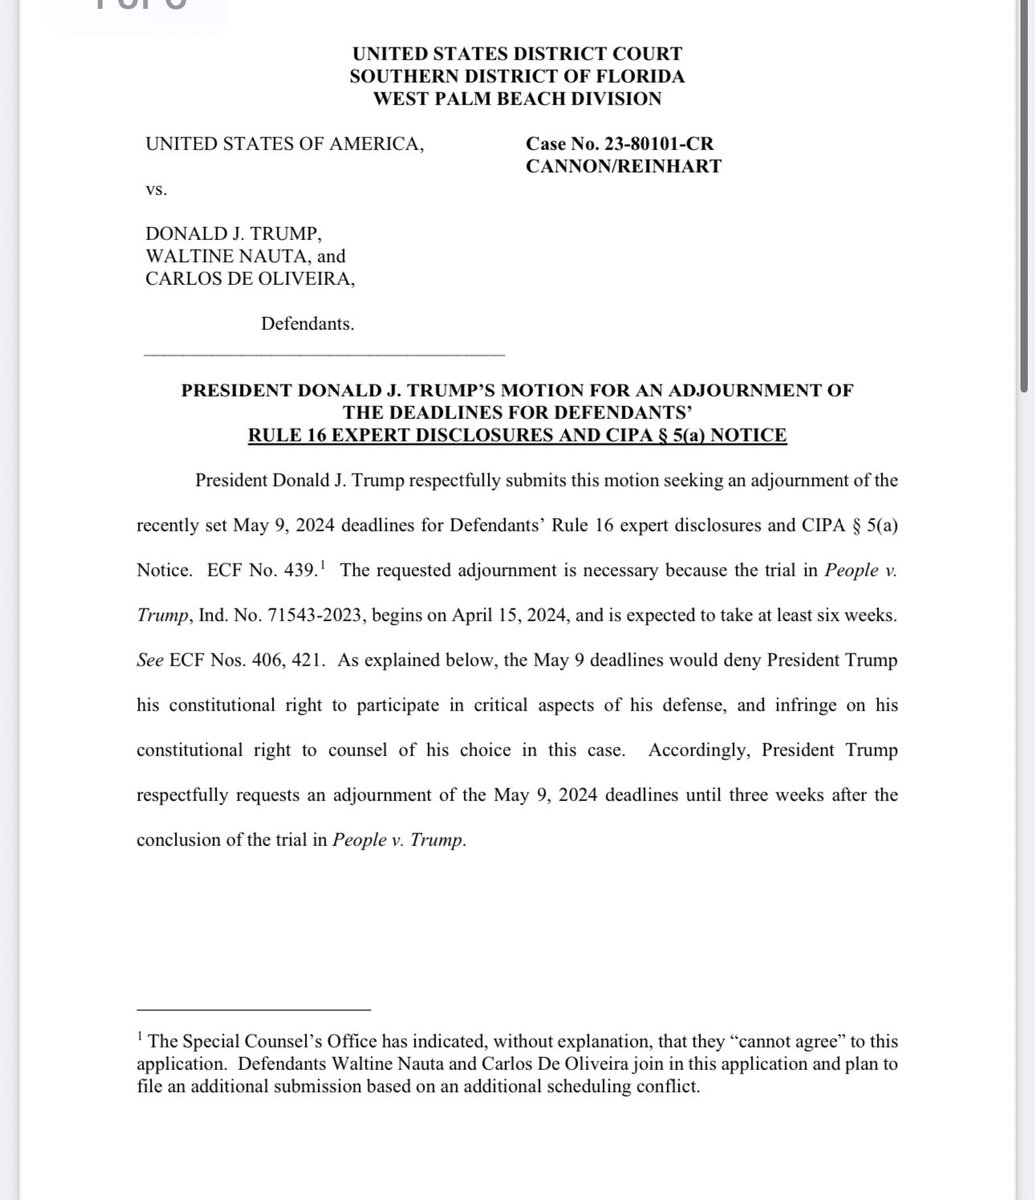 Trump moves to delay May 9 deadline Judge Cannon set for the filing of his CIPA Section 5 notice in the classified docs case. Trump says a delay is necessary bc he’ll be on trial in NY starting Monday. He wants the deadline moved to 3 weeks after conclusion of the NY trial.